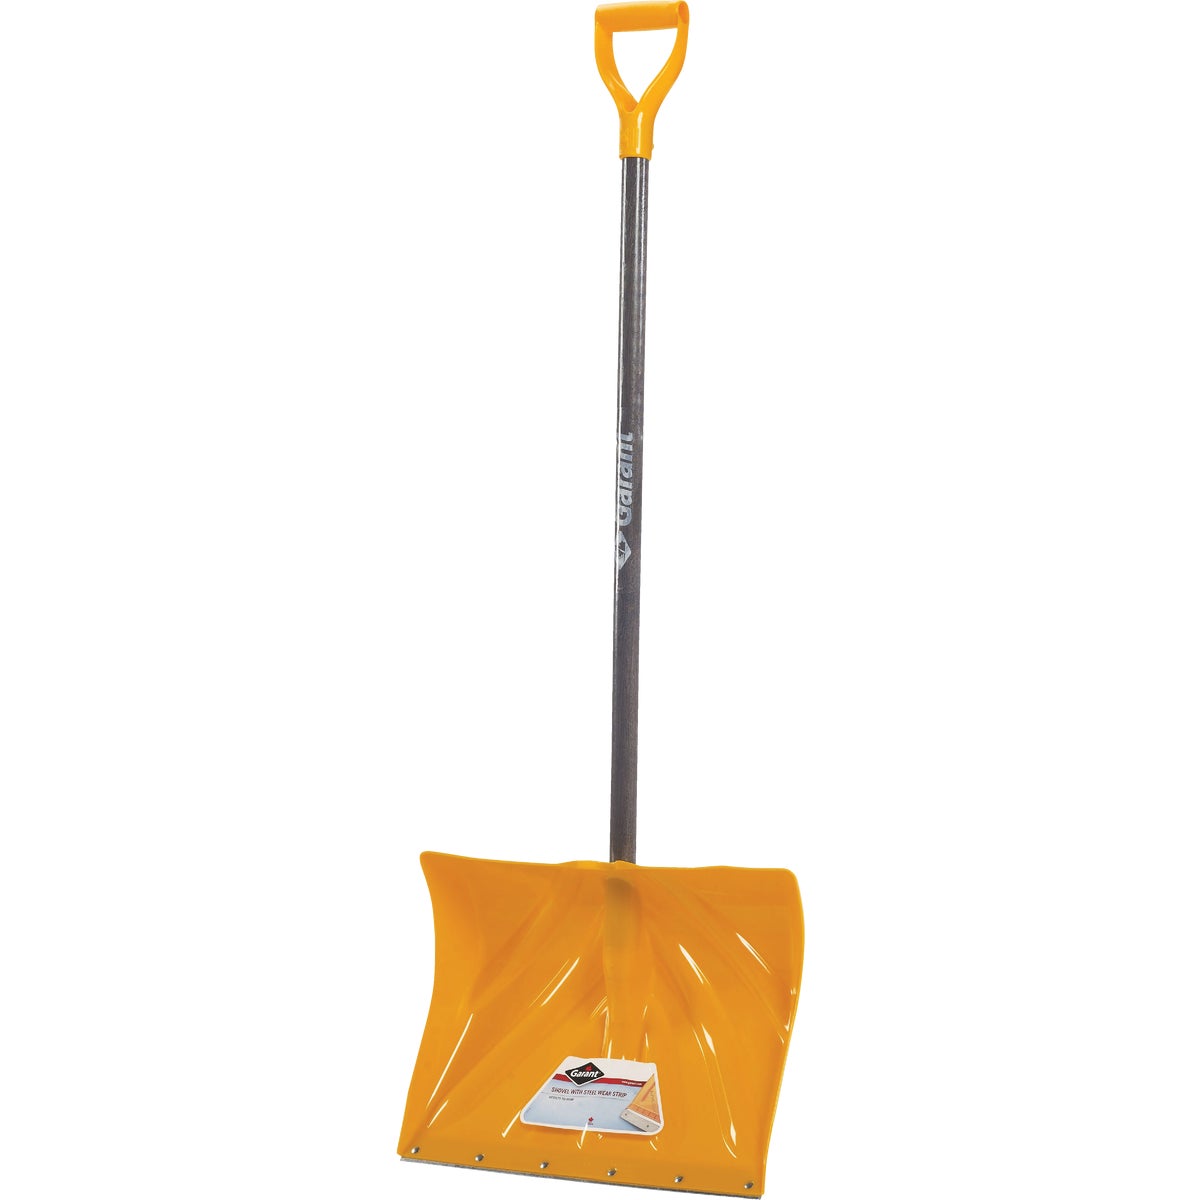 Item 718021, Alpine label snow shovel features a 13.5 In. x 18 In.